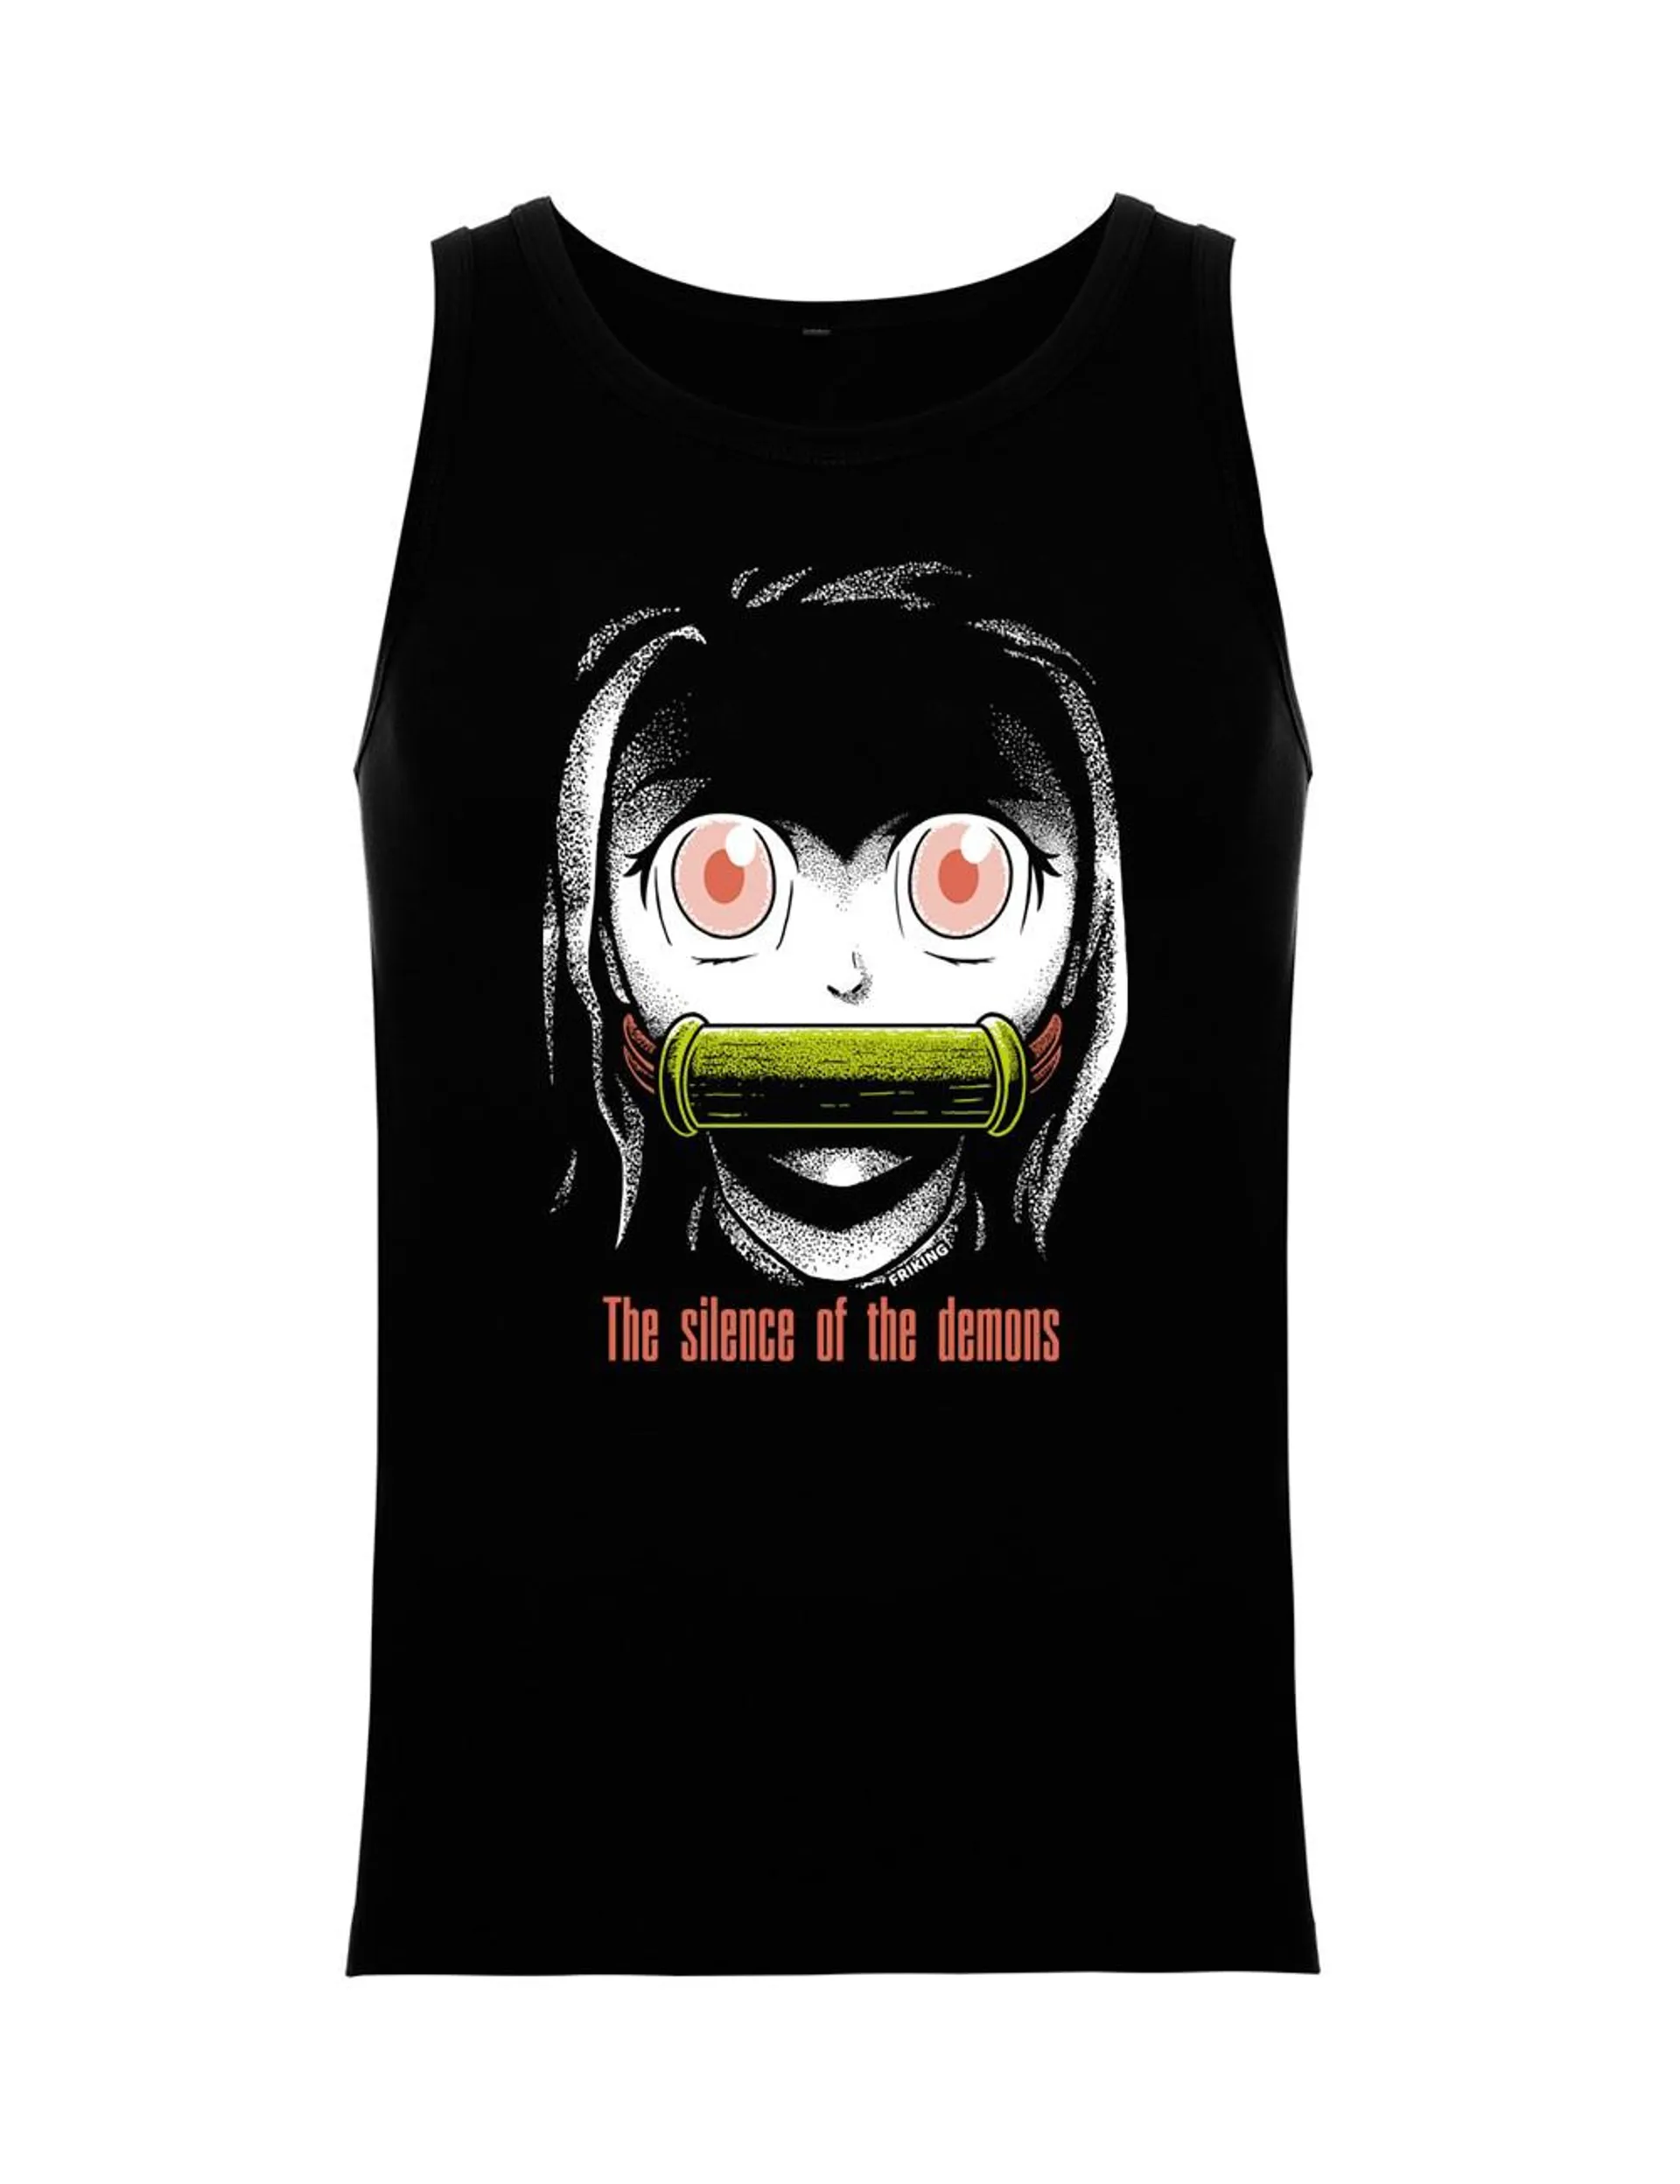 CAMISETA HOMBRE TIRANTES The silence of the demons